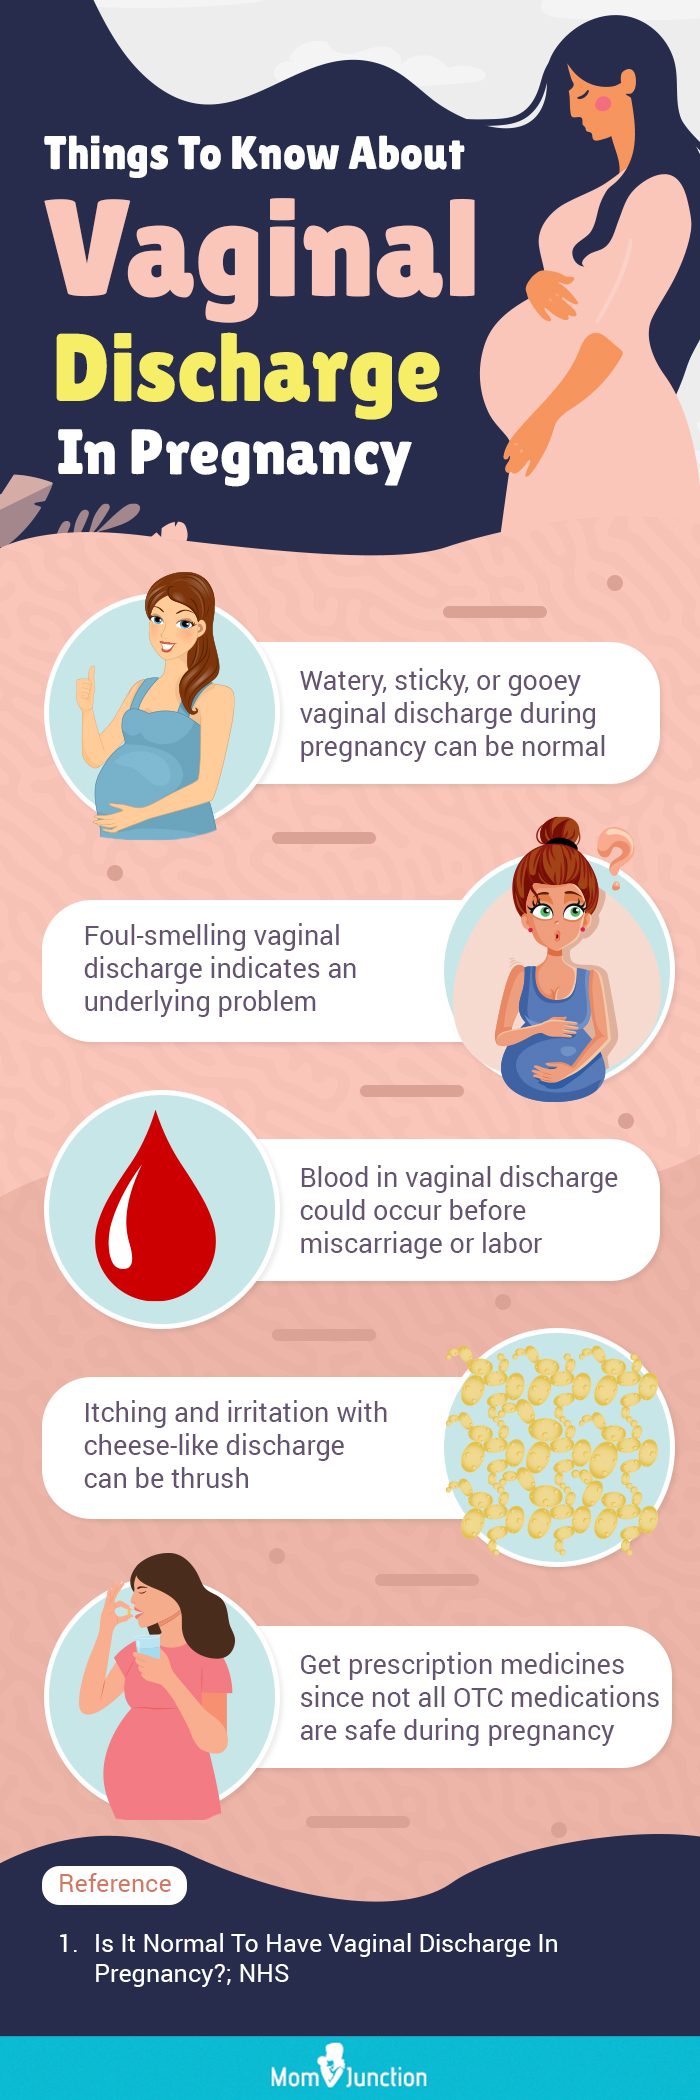 https://www.momjunction.com/wp-content/uploads/2023/04/Things-To-Know-About-Vaginal-Discharge-In-Pregnancy.jpg